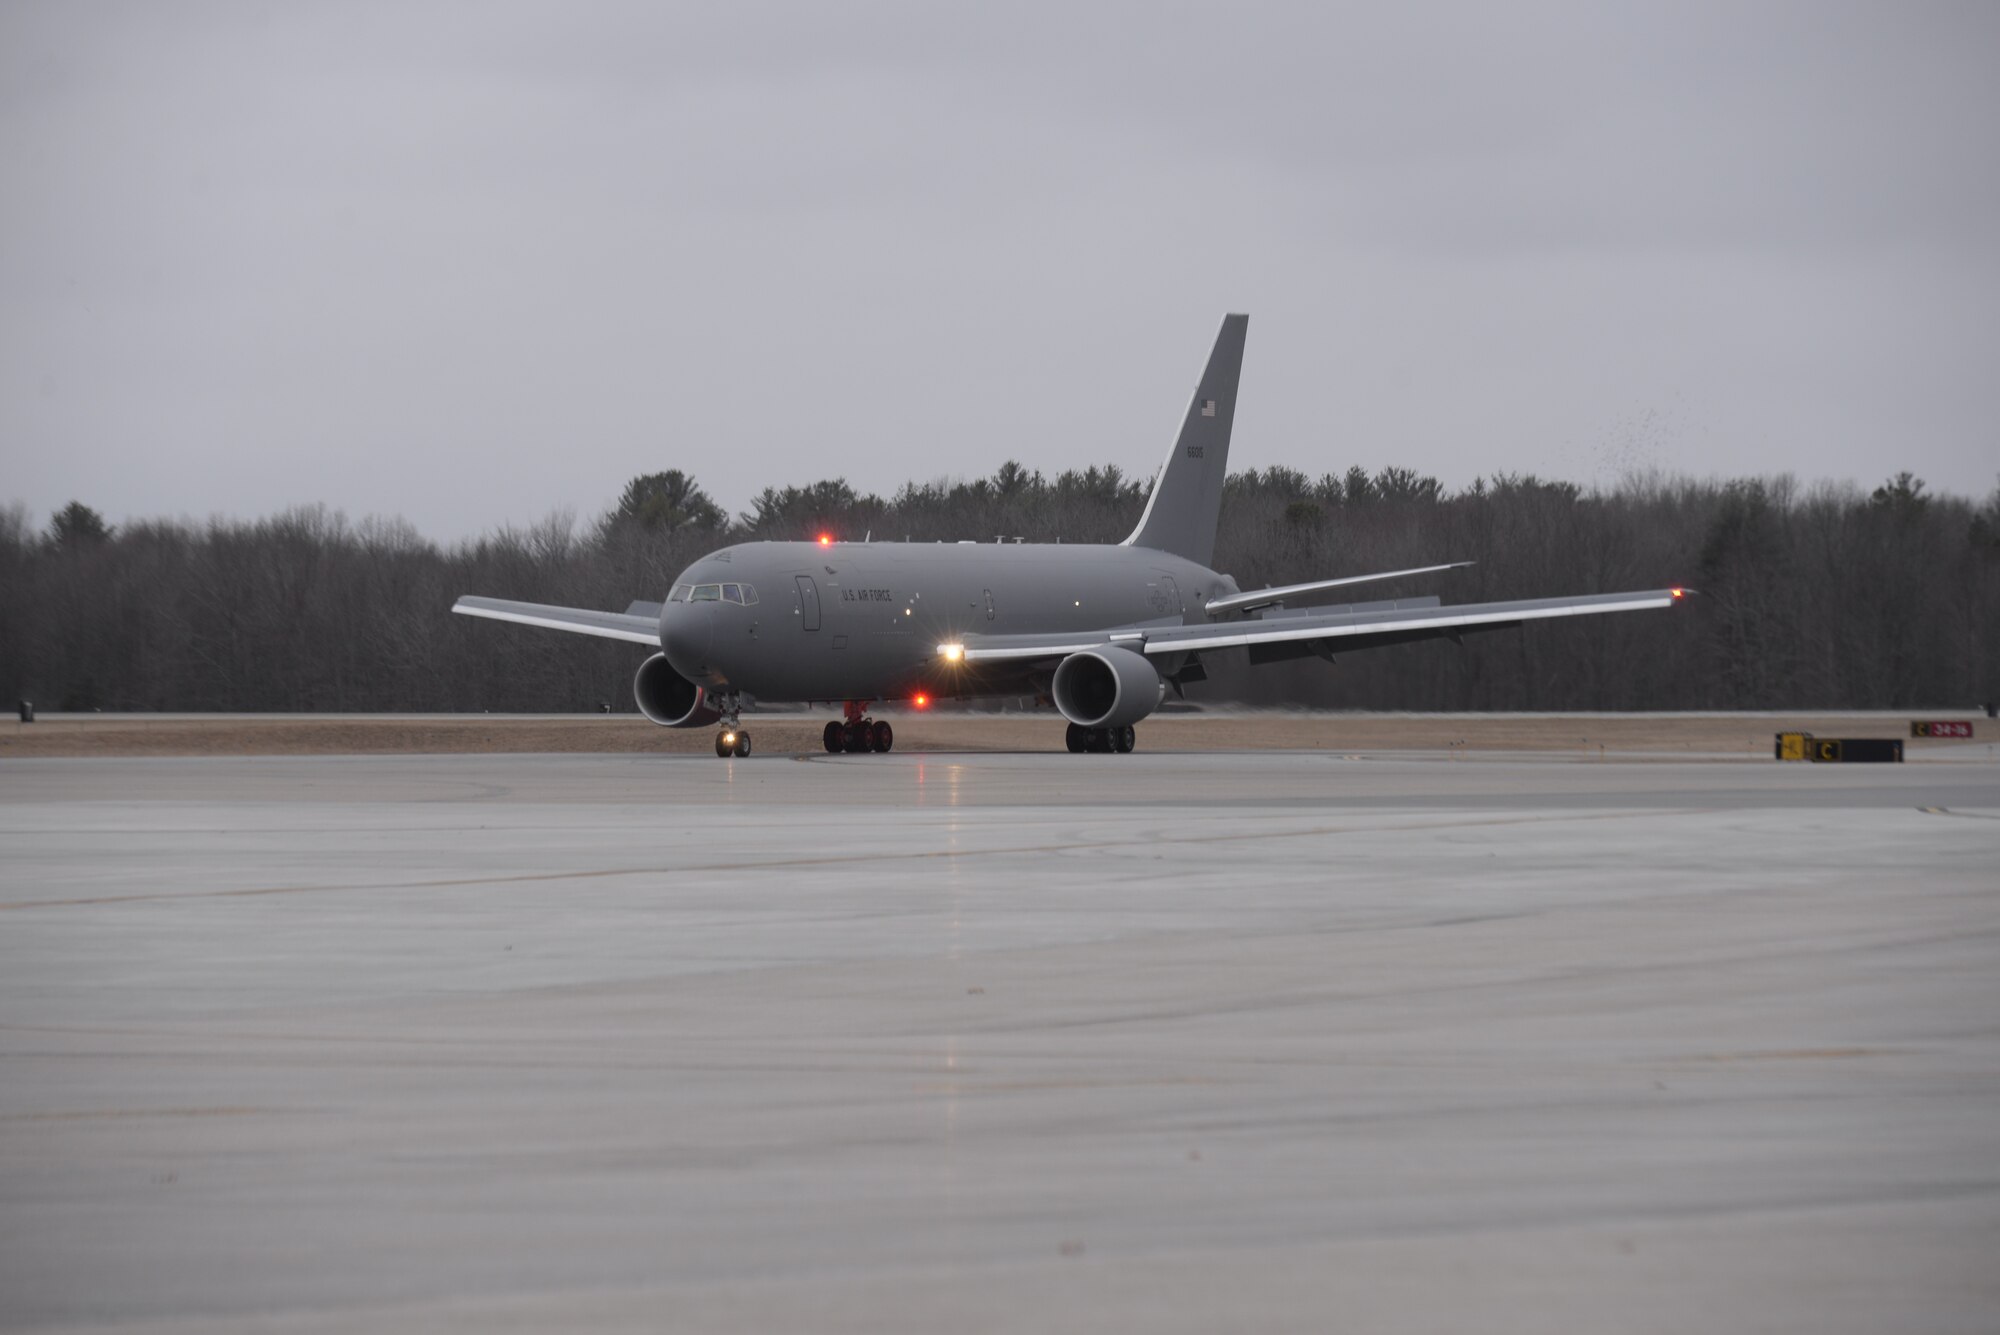 Aircrew assigned to the 133rd Air Refueling Squadron, deliver the 157th Air Refueling Wing’s seventh KC-46A from Boeing Co., March 6, 2020, at Pease Air National Guard Base, N.H. On board, U.S. Air Force Maj. Gen. Thomas J. Kennett, the Air National Guard Assistant to the Commander, Air Mobility Command, was the delivery official. (U.S. Air National Guard photo by Tech. Sgt. Aaron Vezeau)